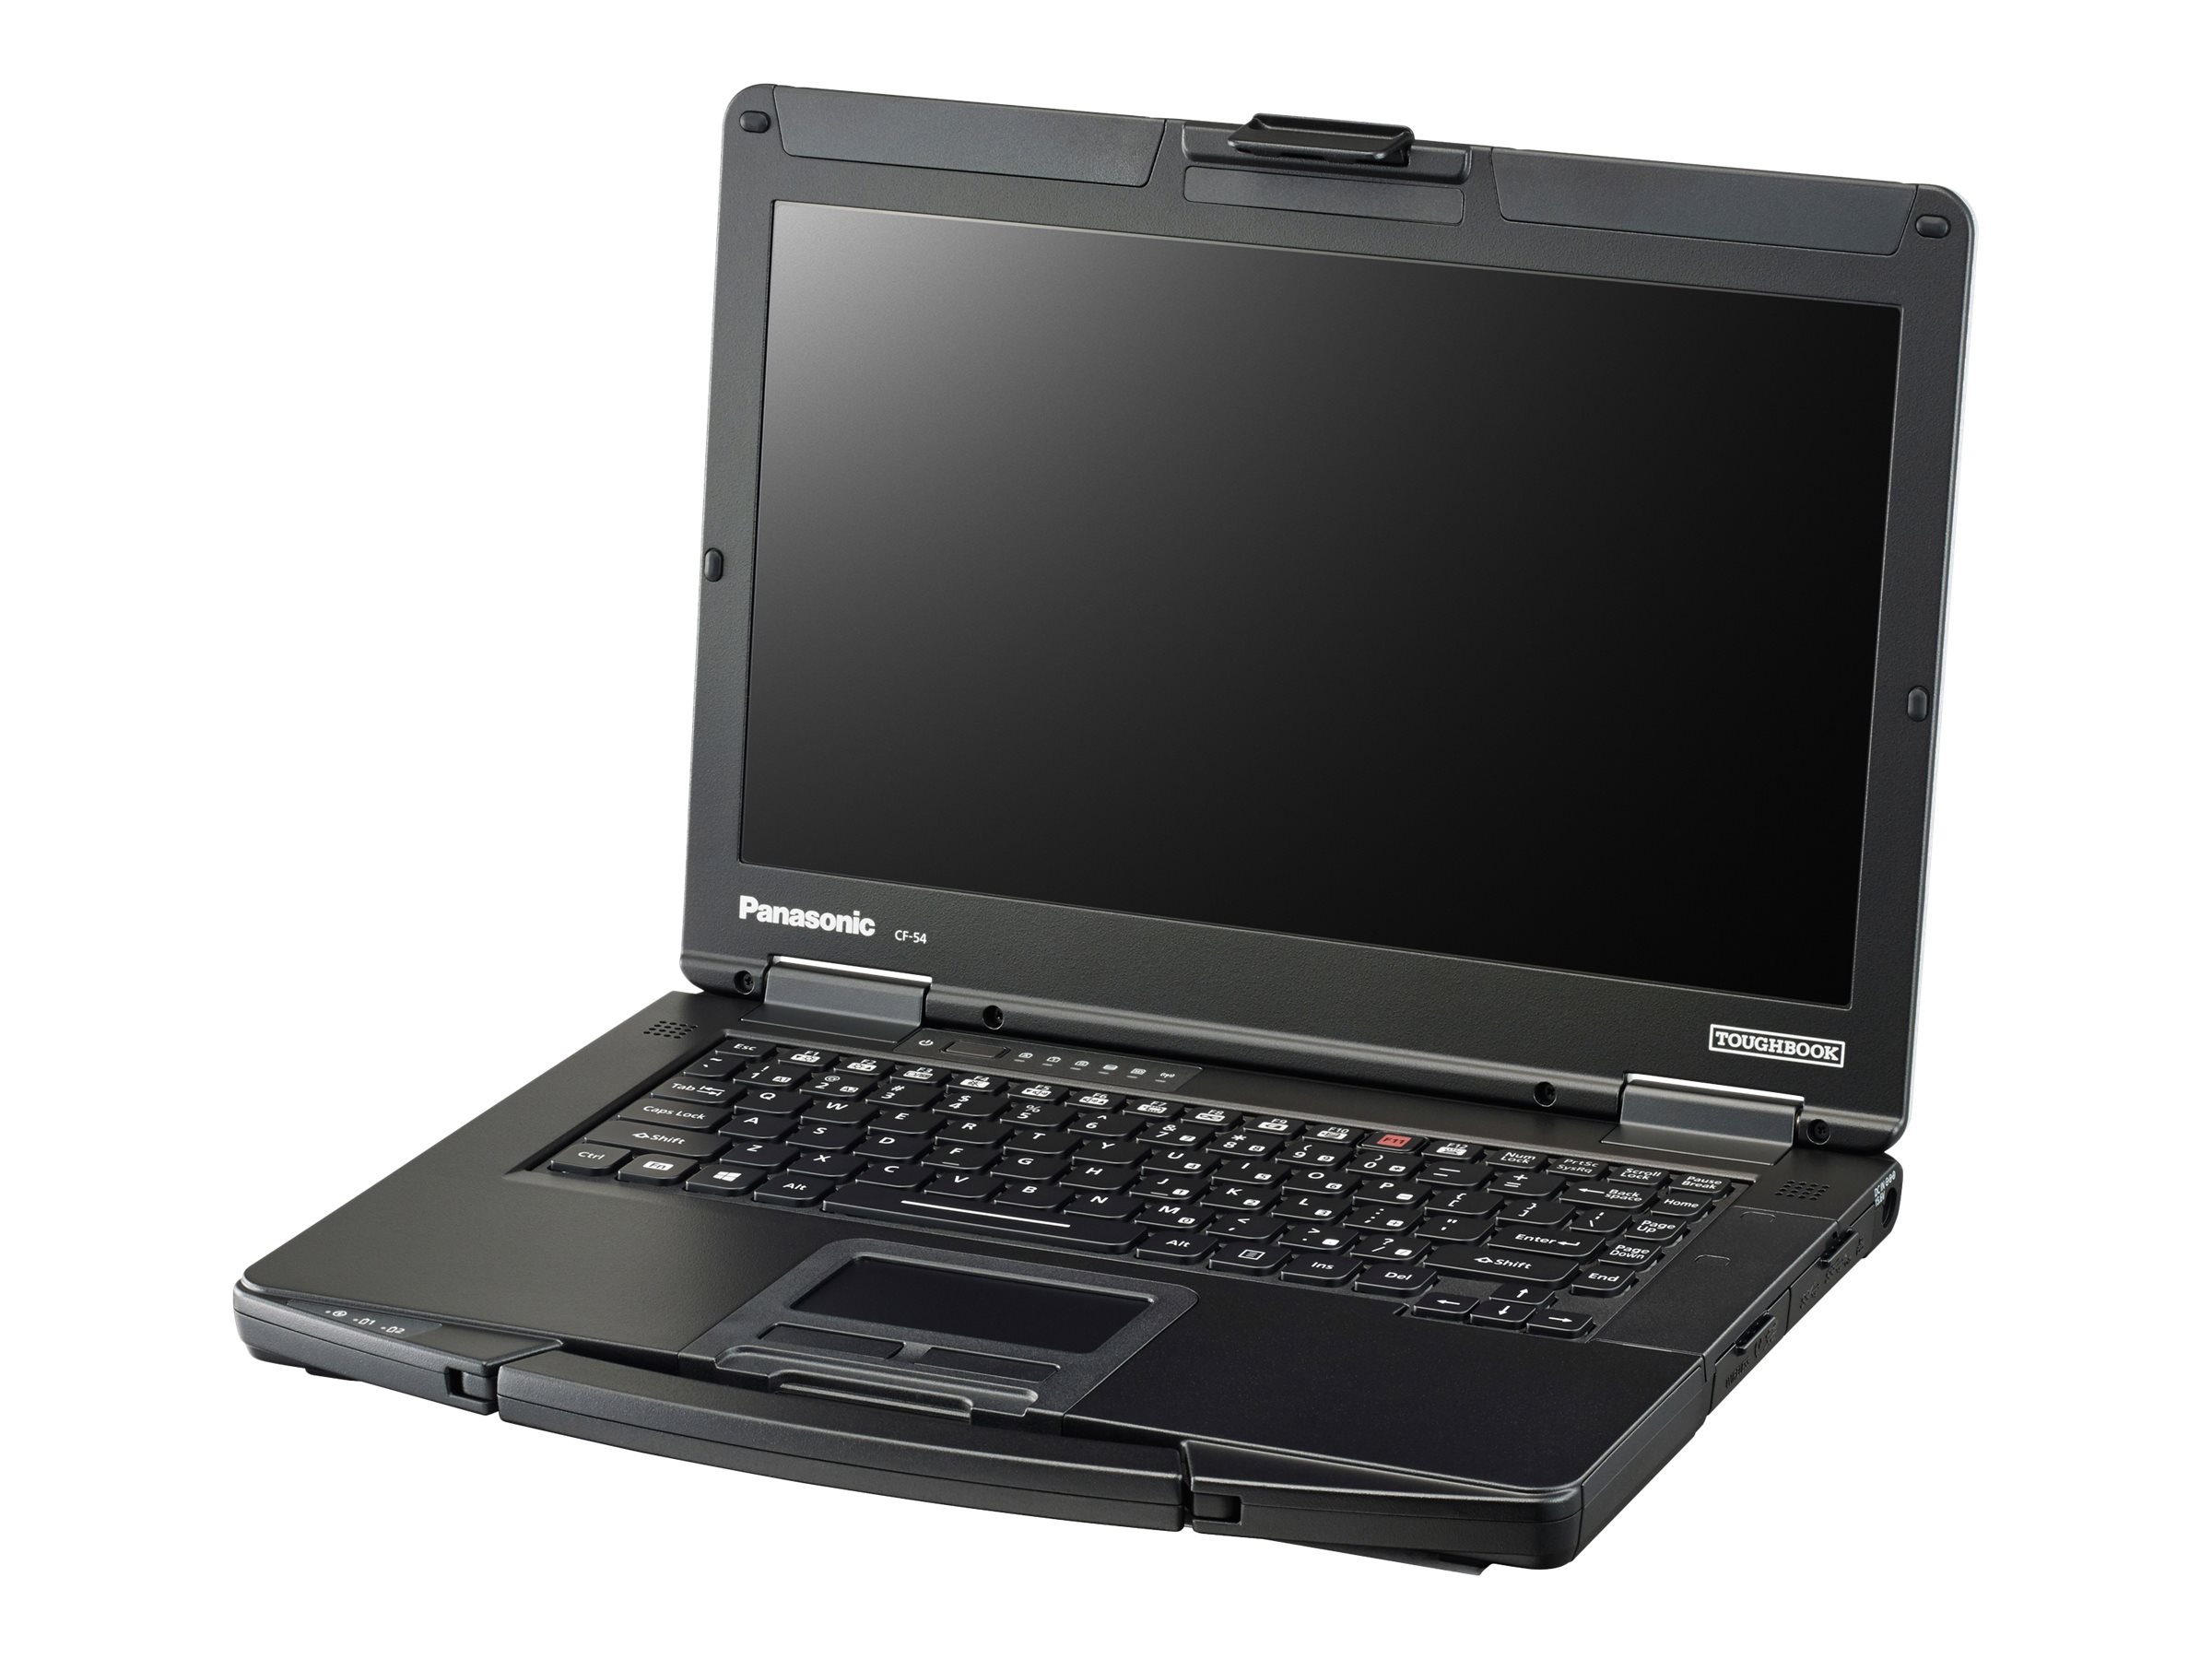 Panasonic Toughbook 54 Prime - Rugged - Intel Core i7 - 6600U / up to 3.4 GHz - vPro - Win 10 Pro 64-bit - HD Graphics 520 - 8 GB RAM - 256 GB SSD - DVD SuperMulti - 14" 1366 x 768 (HD) - Wi-Fi 5 - with Toughbook Preferred - image 1 of 16